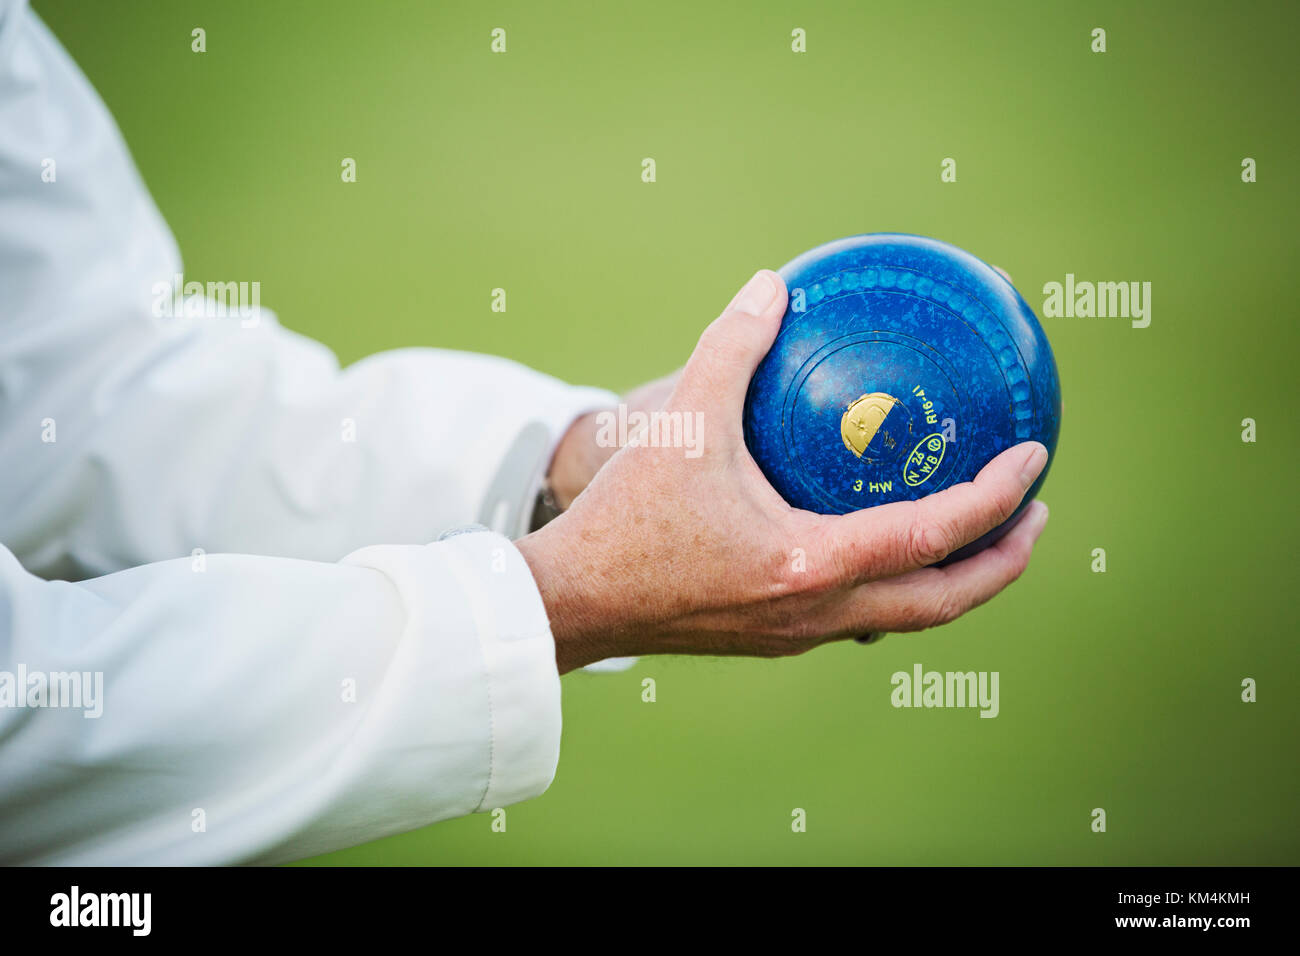 A man holding a blue wooden lawn bowls ball in his hands. Stock Photo